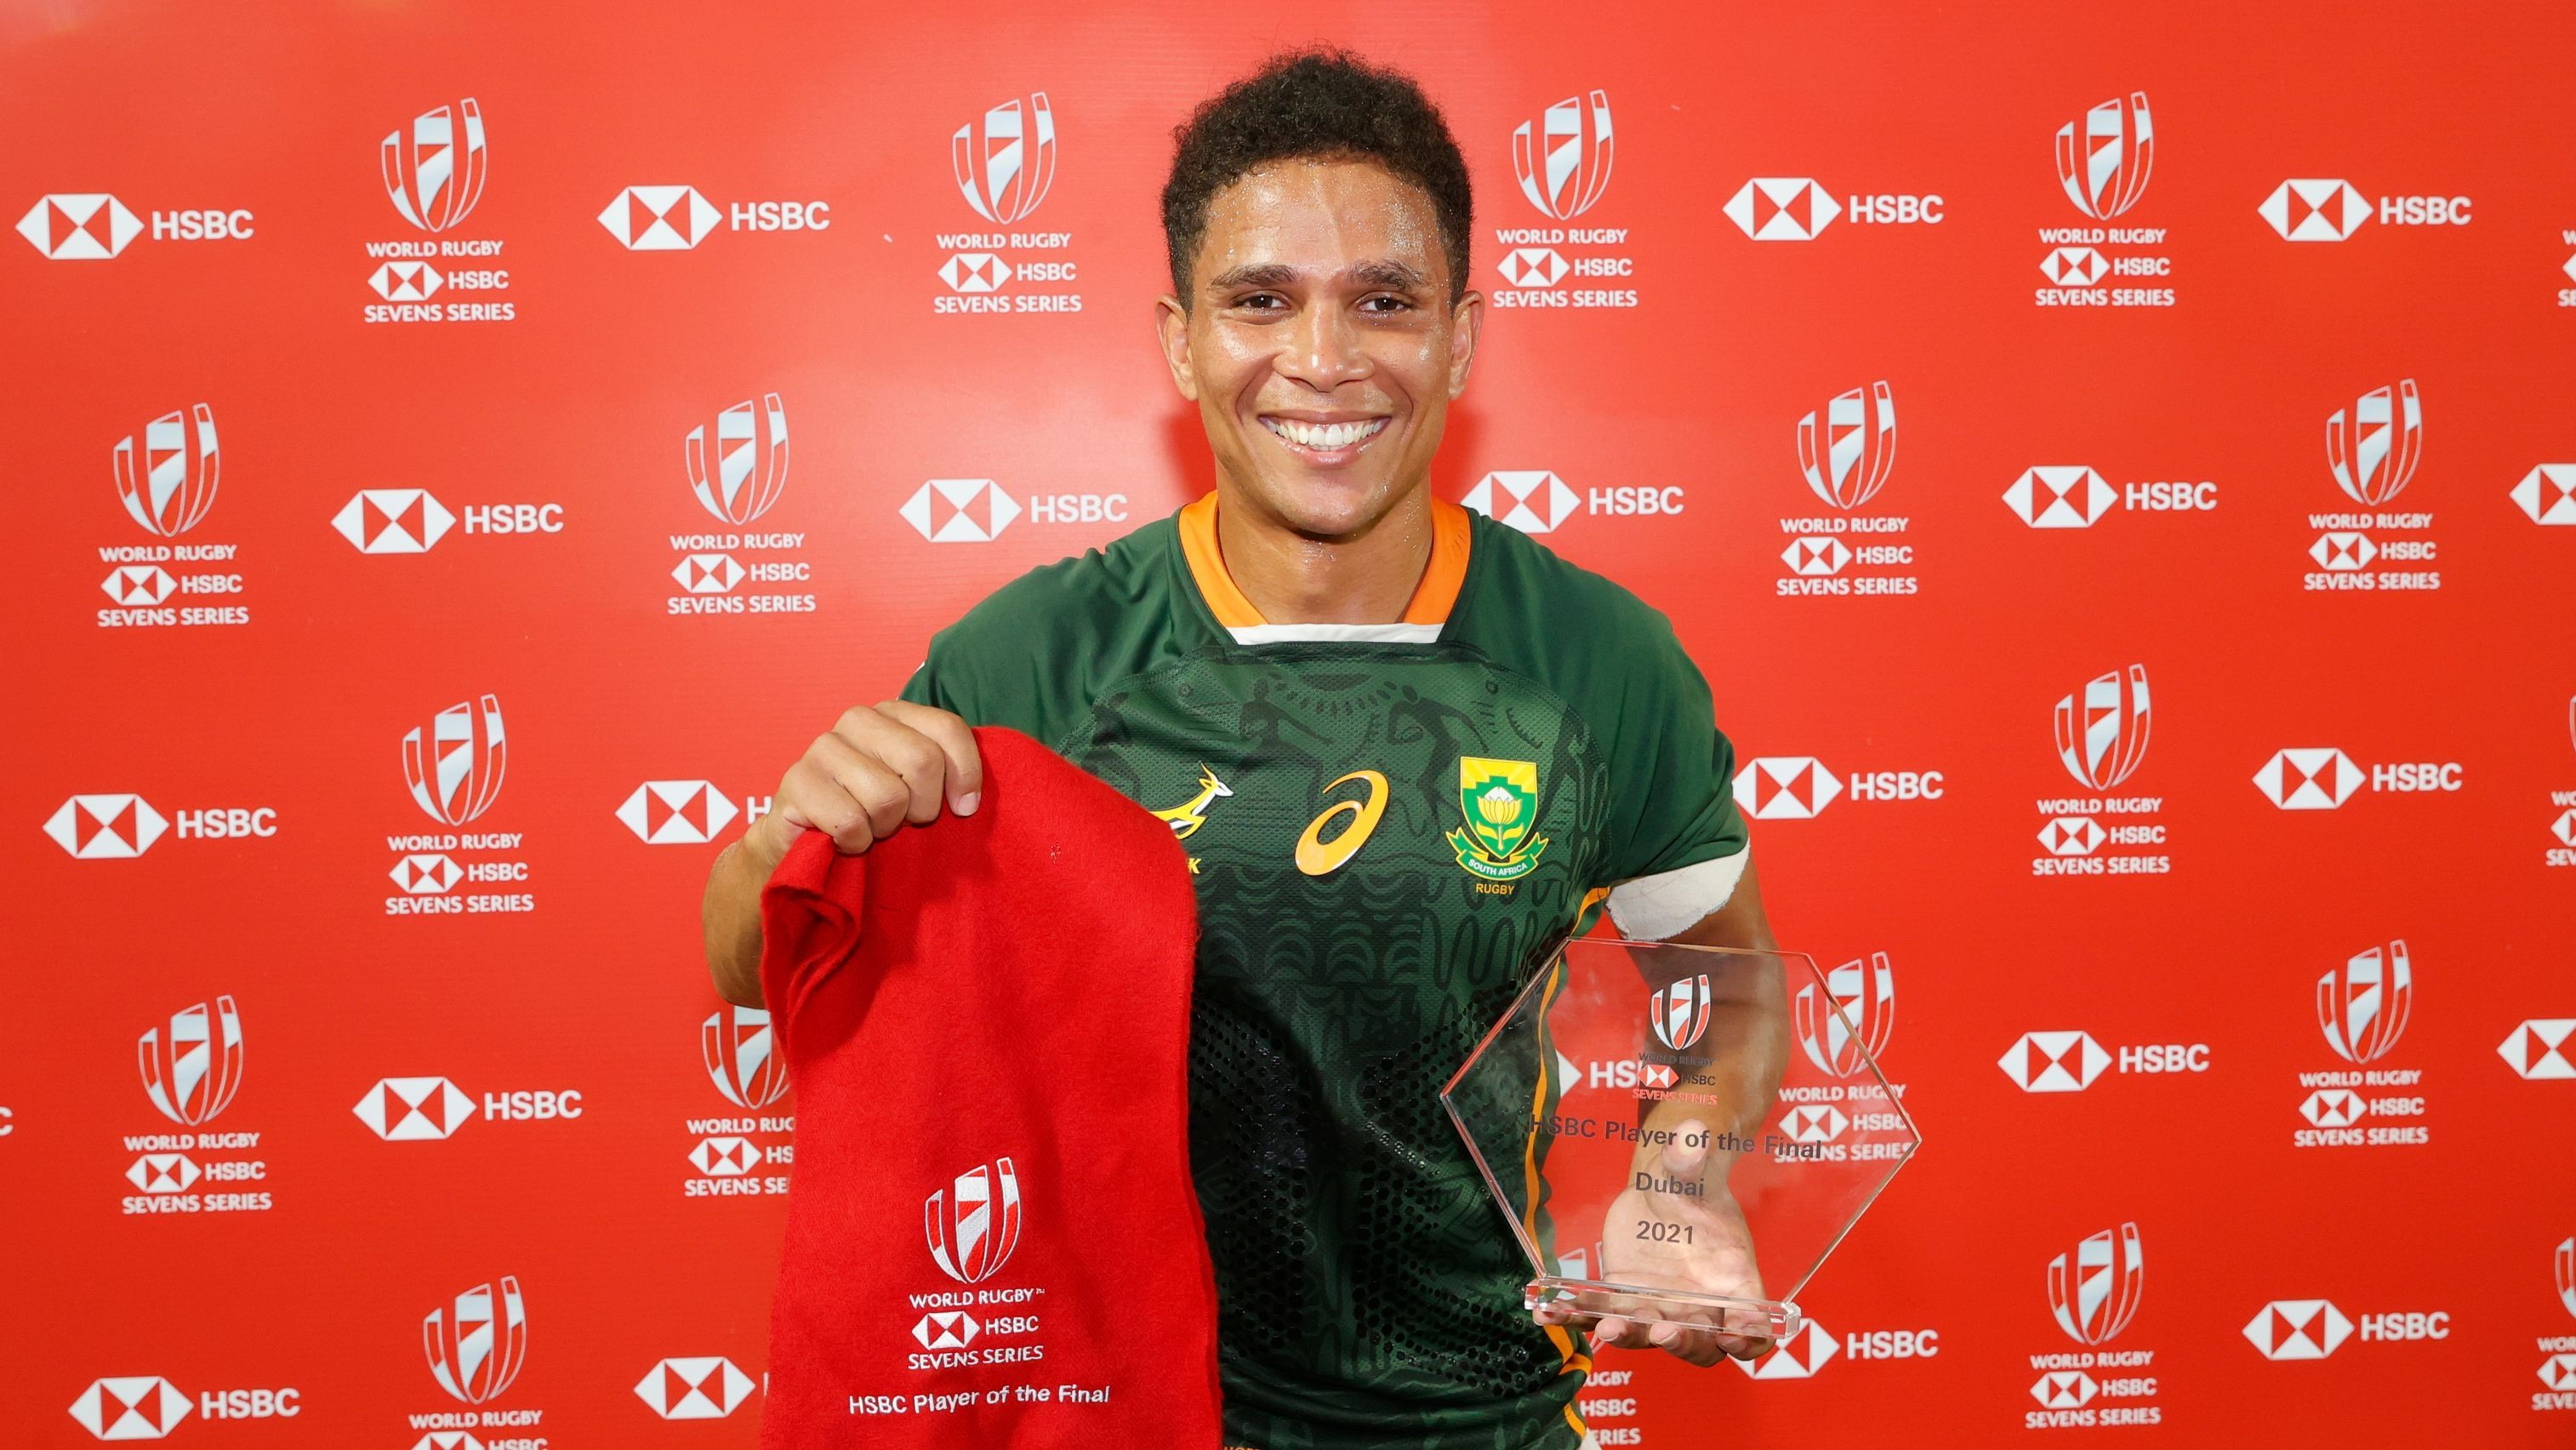 South Africa's Ronald Brown is HSBC player of the Final on day two of the Dubai Emirates Airline Rugby Sevens 2021 men's competition on 27 November, 2021. Photo credit: Mike Lee - KLC fotos for World Rugby/BackpagePix